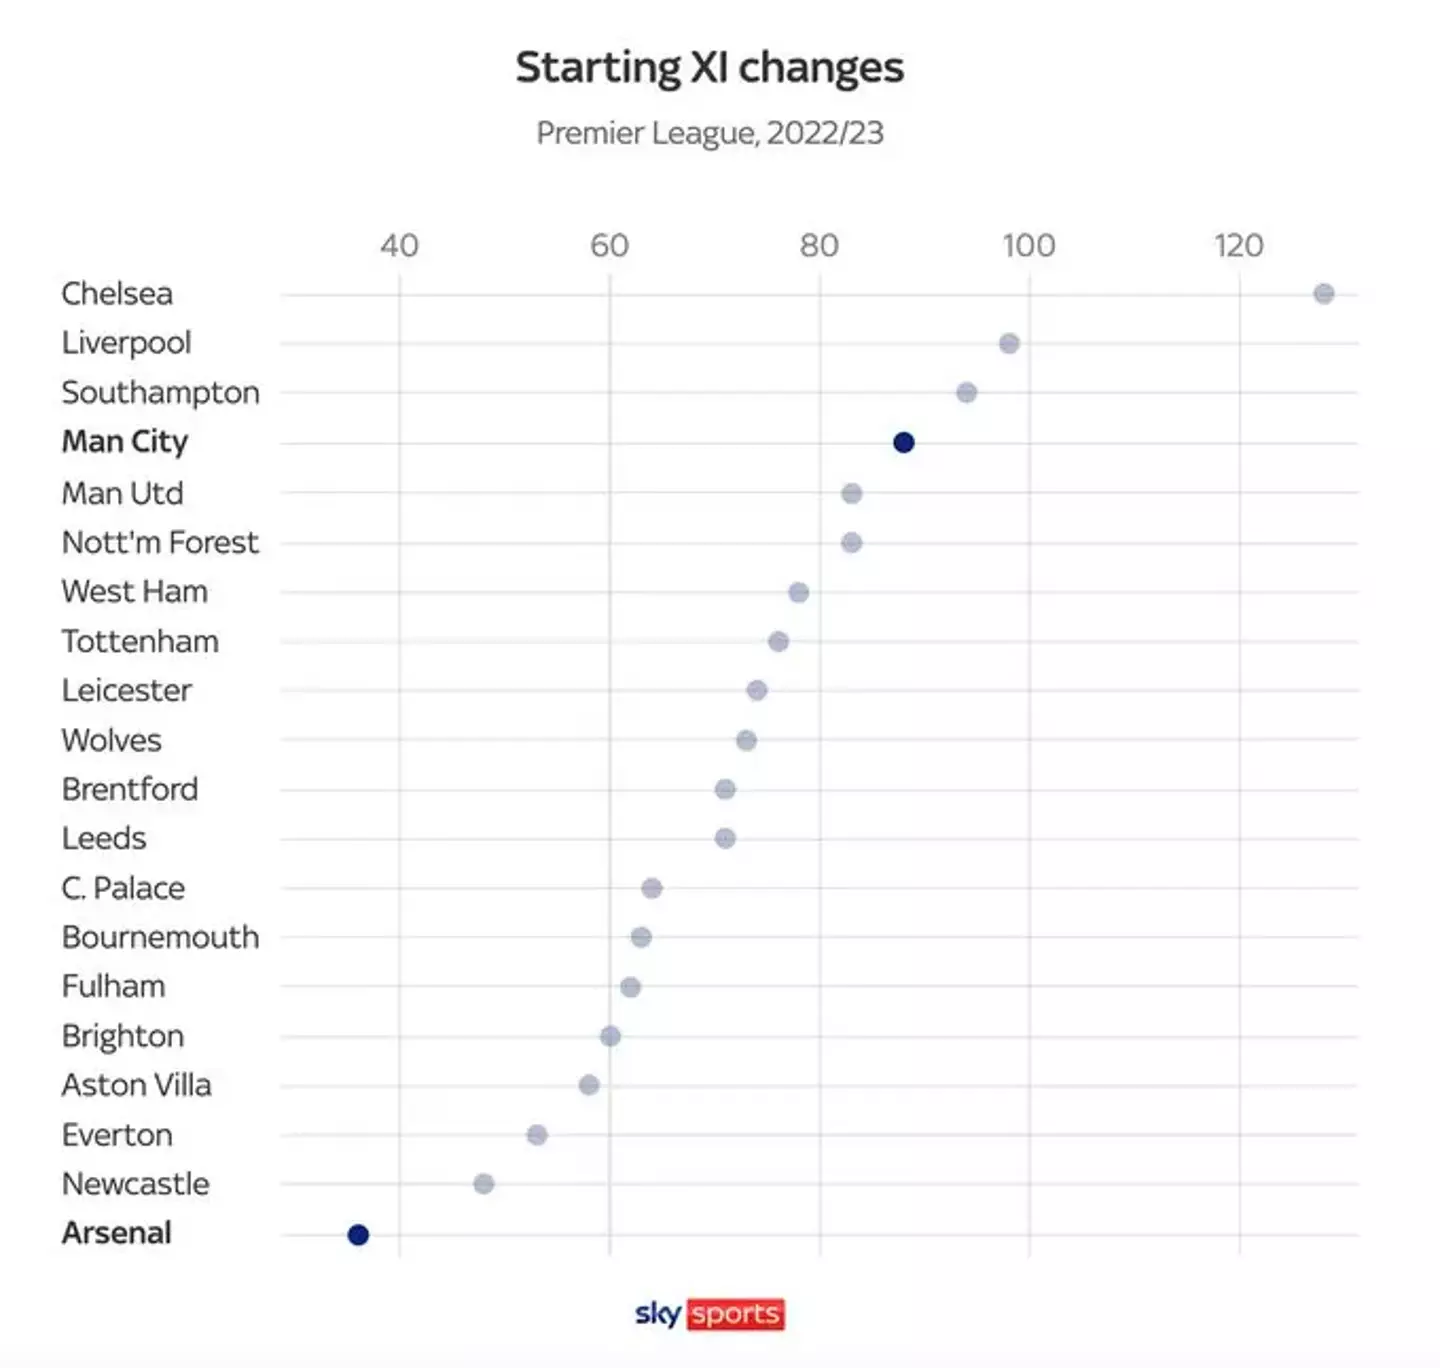 Premier League teams' changes to starting XI.